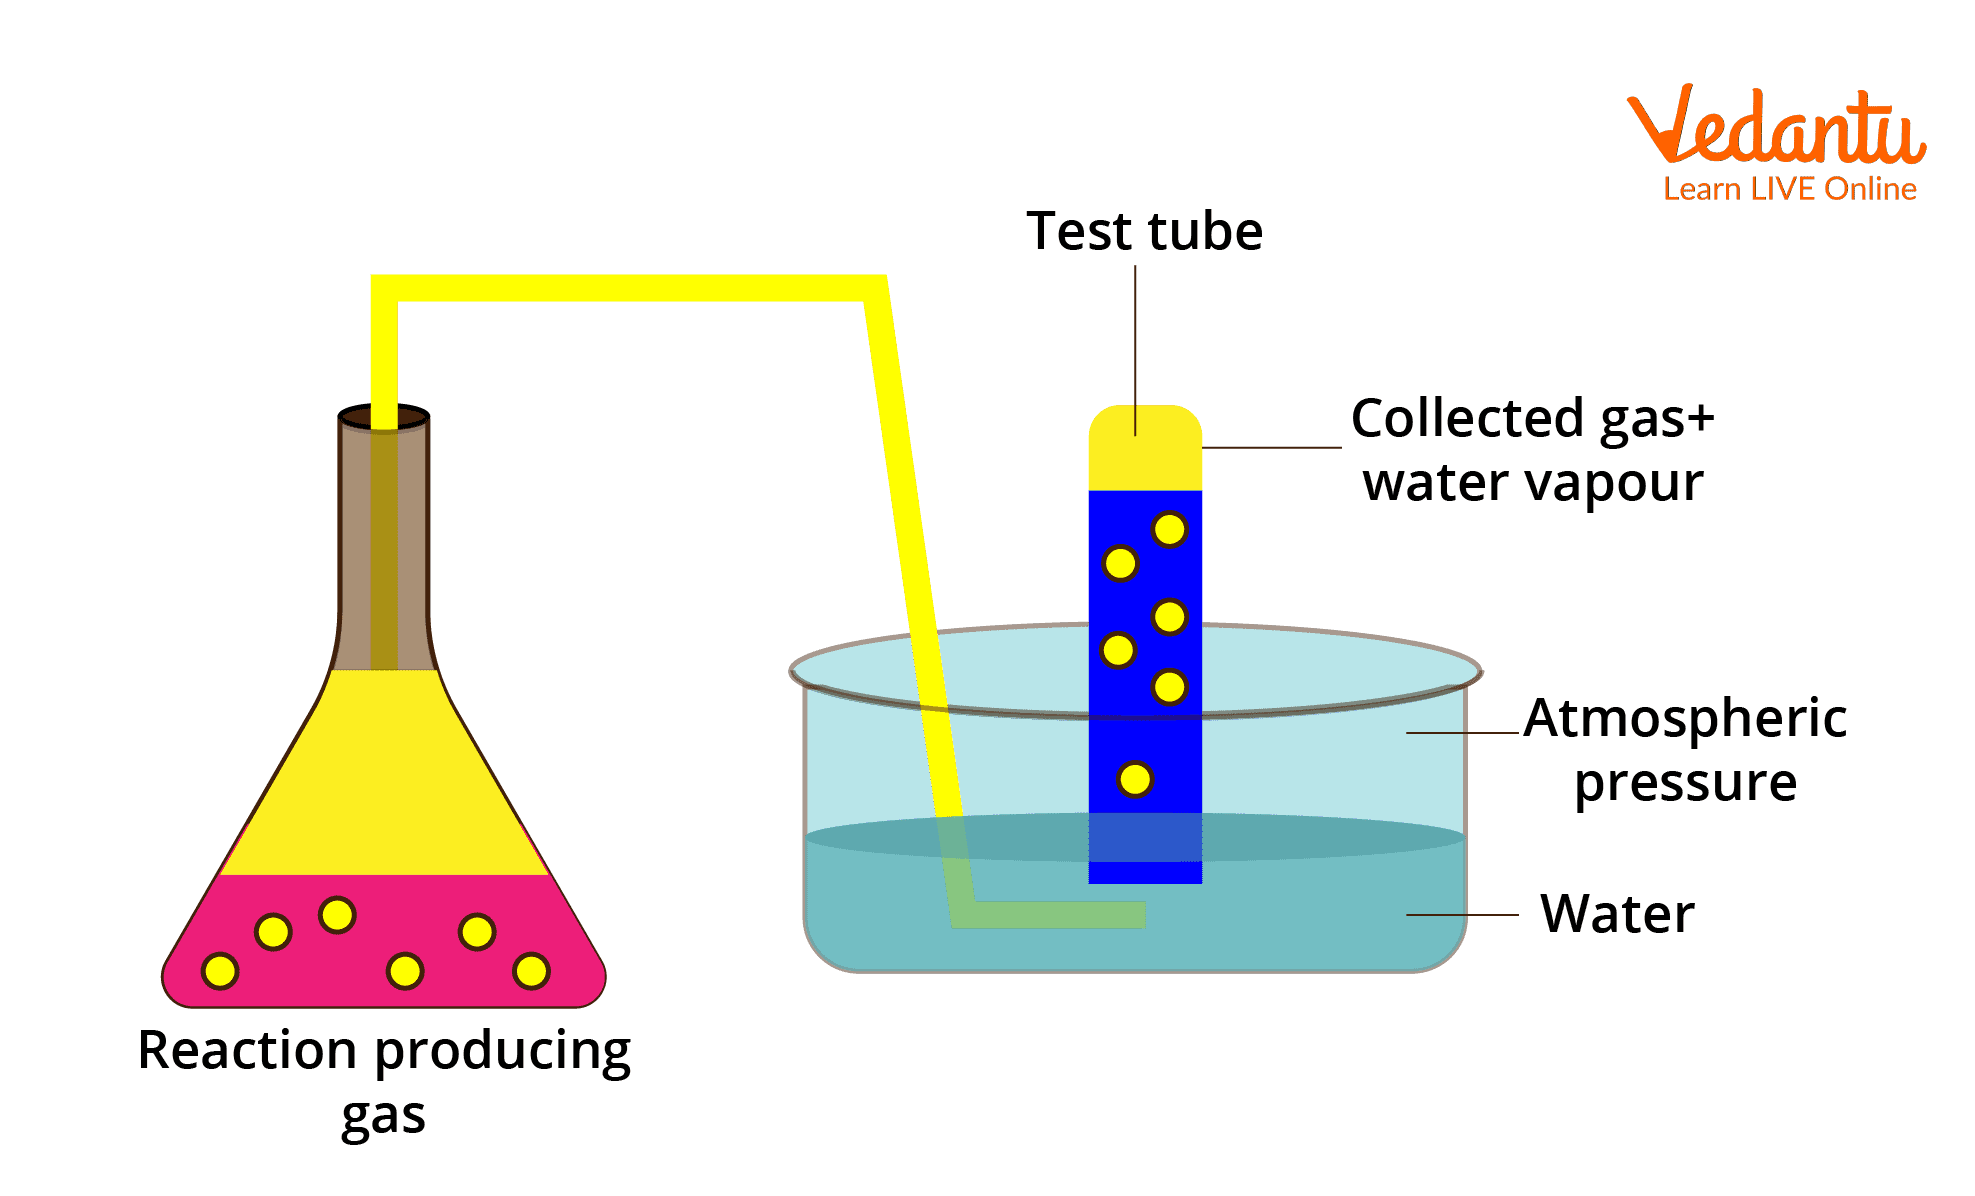 Collection of Gas over Water